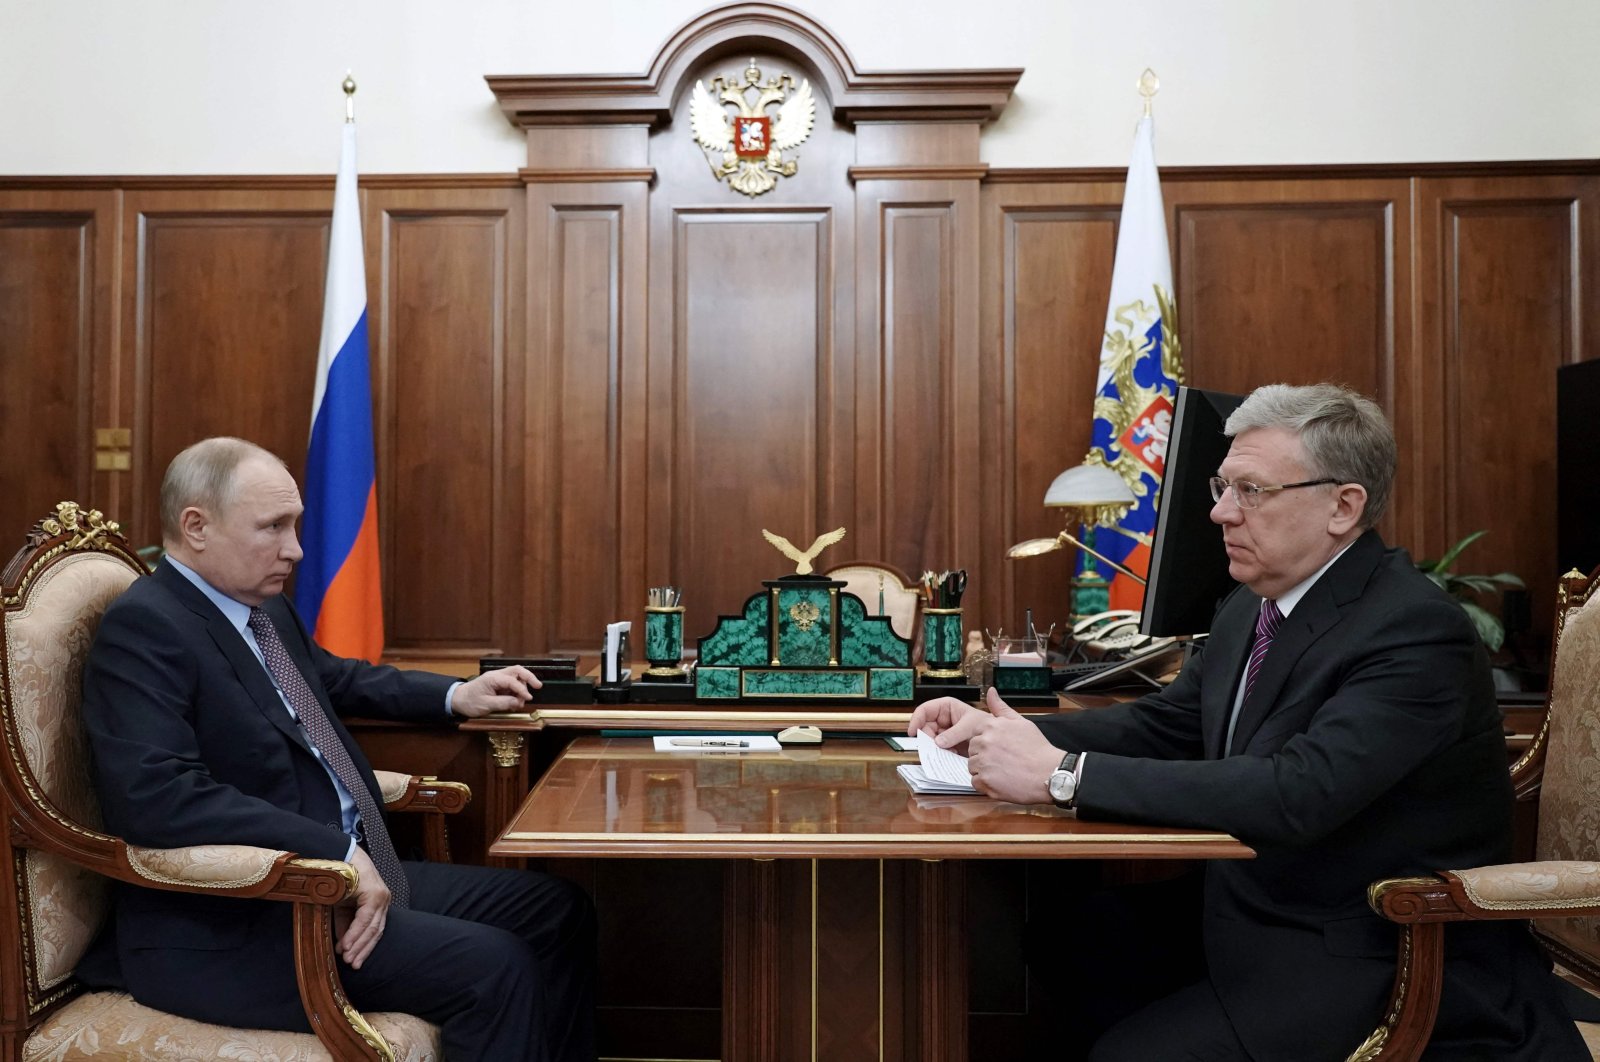 This file photo shows Russian President Vladimir Putin (L) during the meeting with then Audit Chamber head Alexei Kudrin (R) at the Kremlin in Moscow, Russia, March 23, 2021. (AFP Photo)